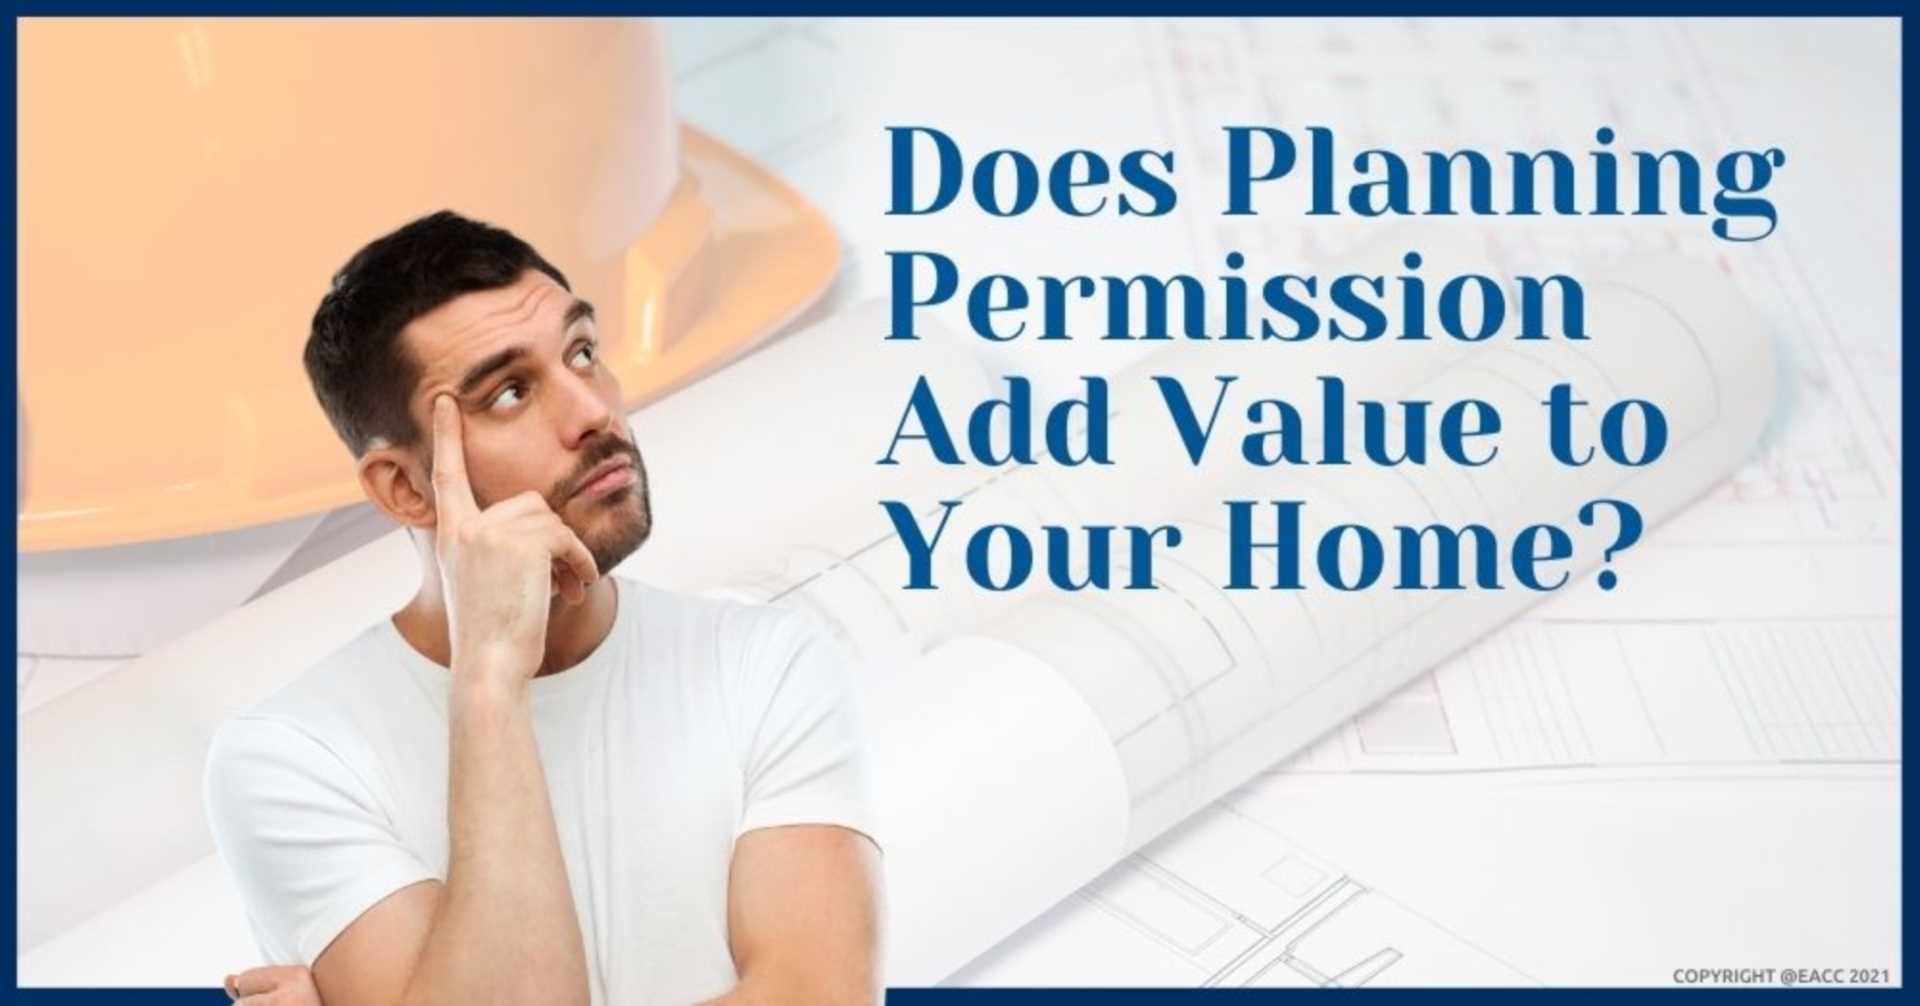 Four Ways Planning Permission Adds Value to Your Home